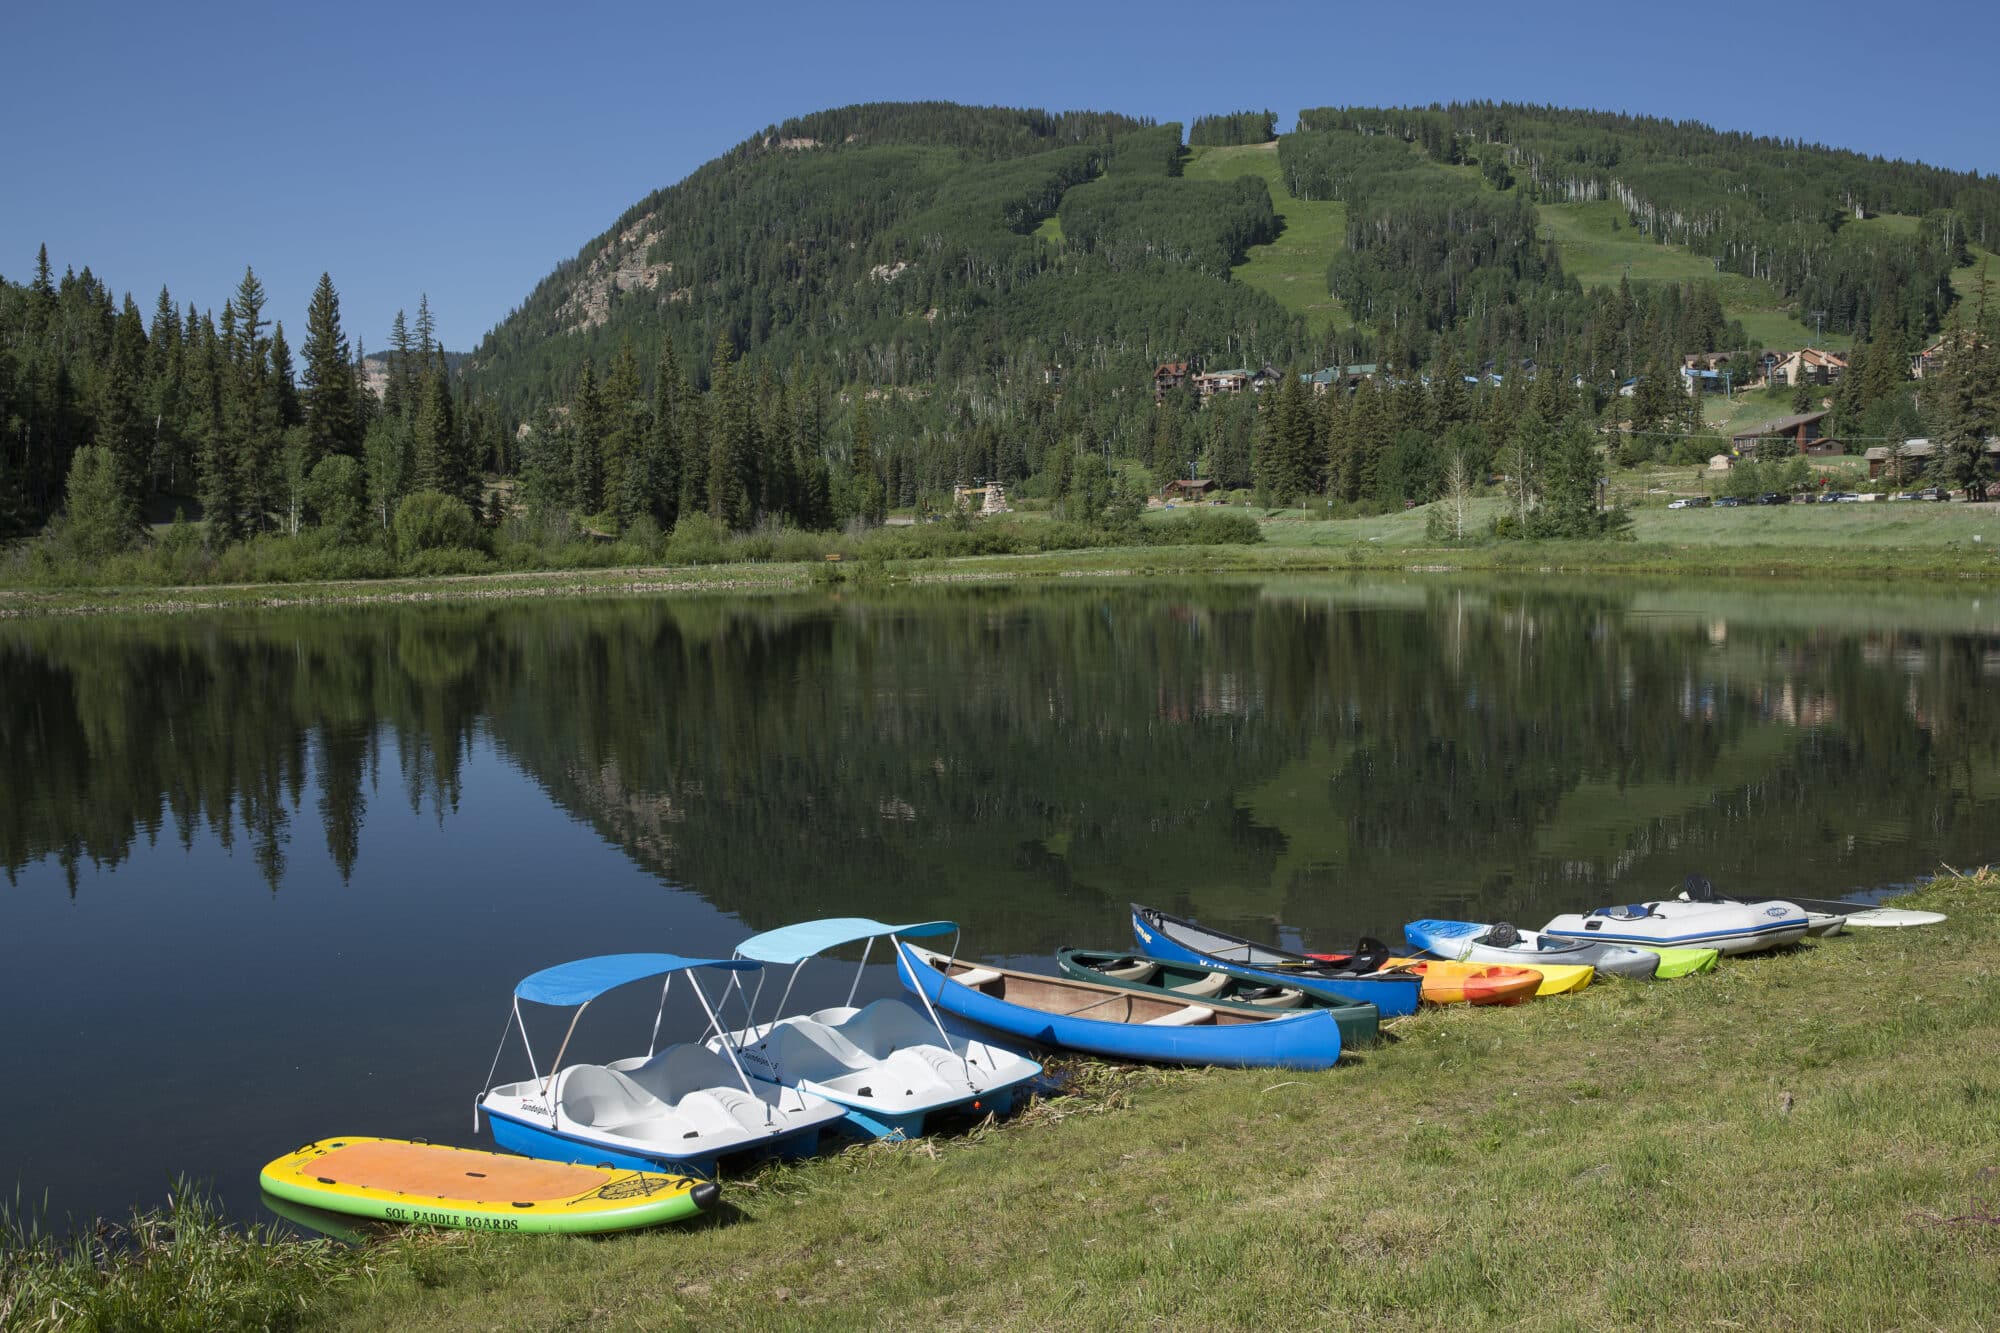 Variety of boat and board options at Twilight Lake